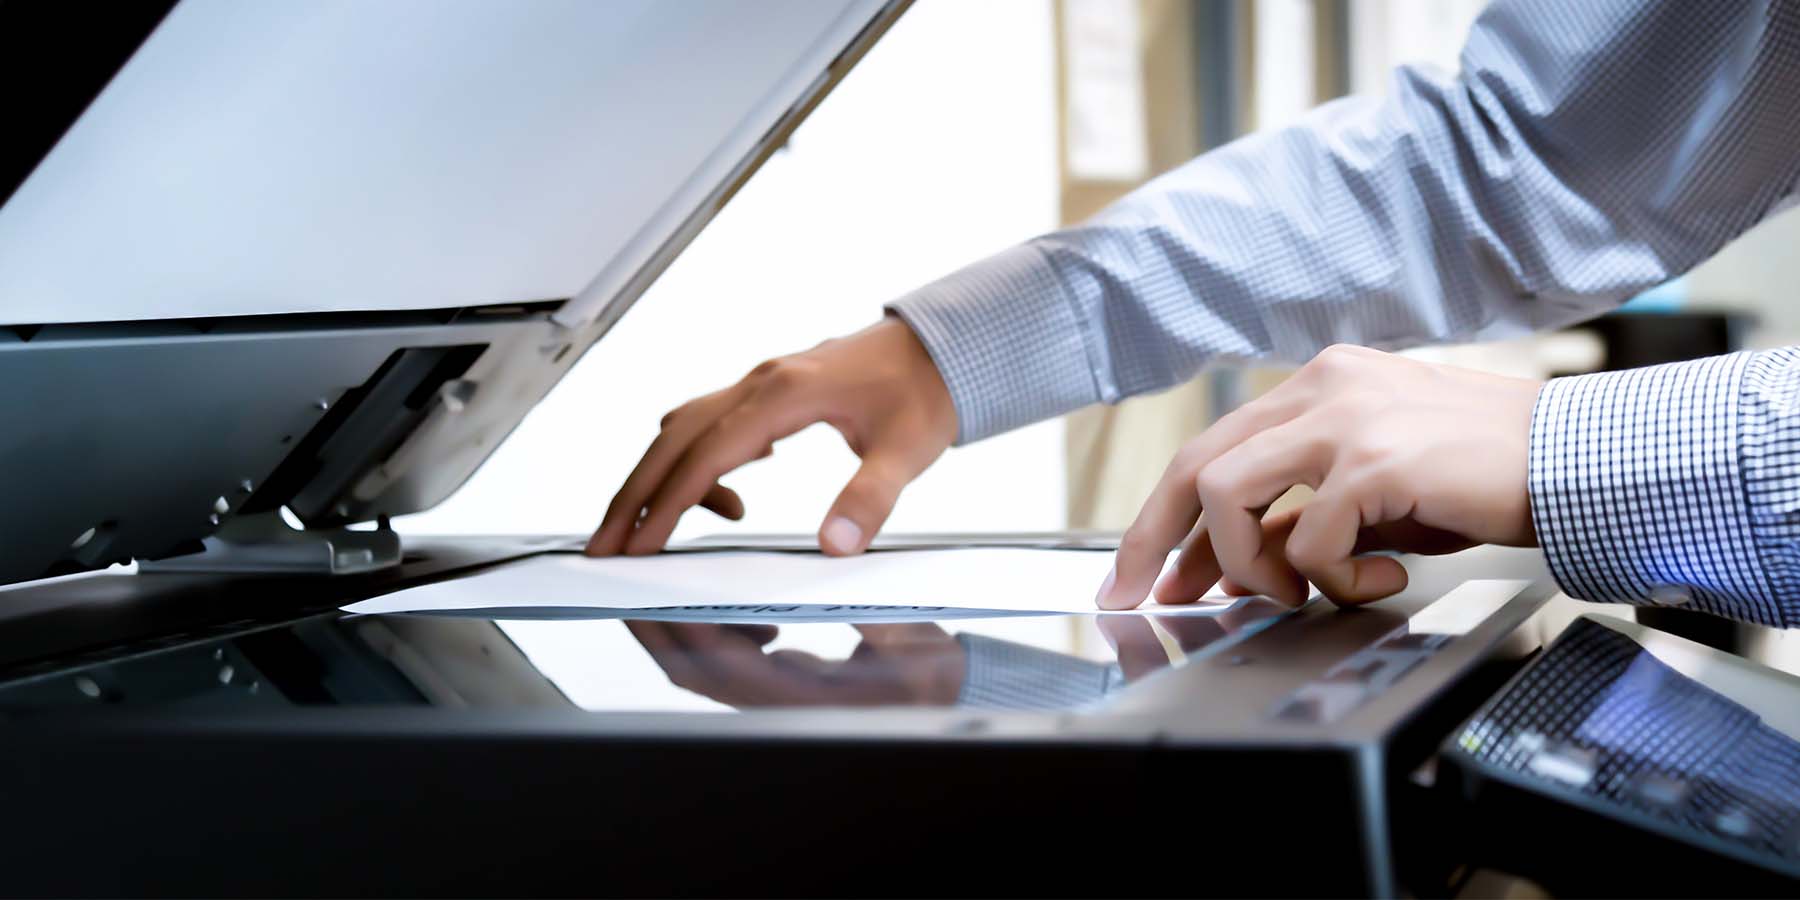 Hands of a man in a suit scanning a document on a printer